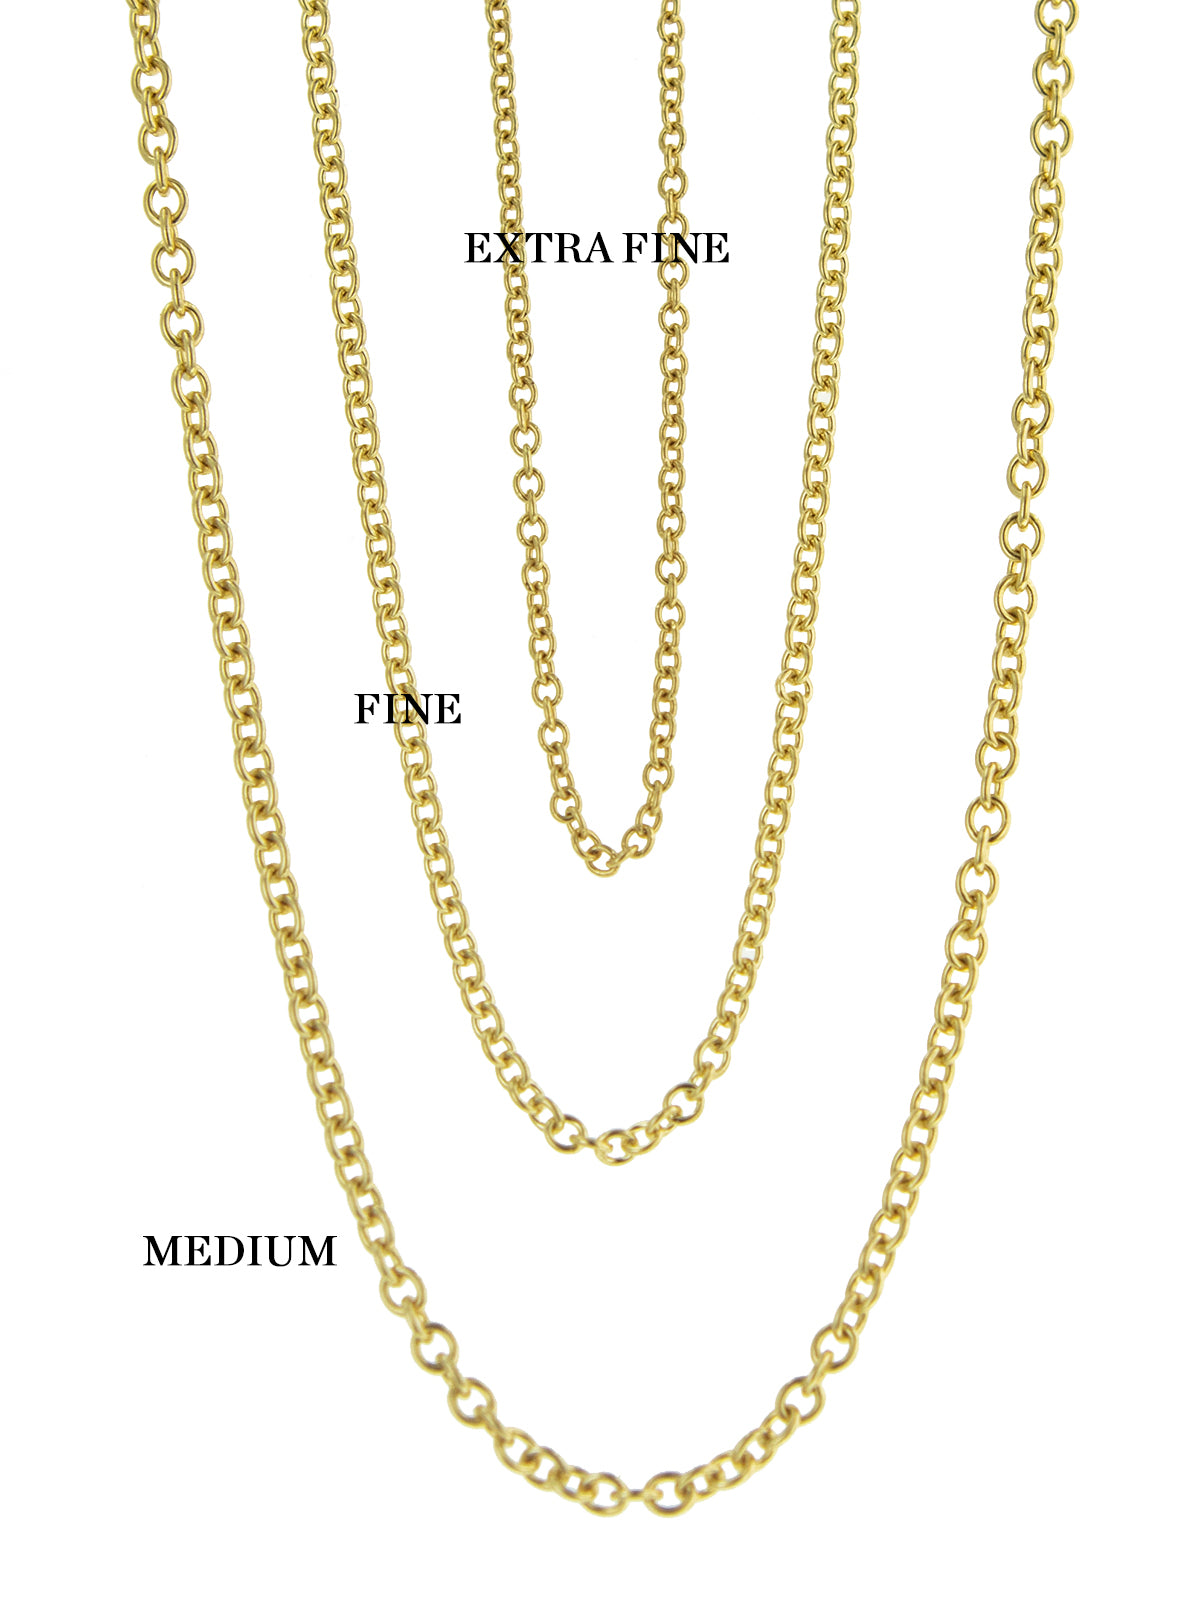 Cable Chain | Gold Chain | Necklace Chain | Pendant Chain 14K Yellow Gold / 20in by Helen Ficalora